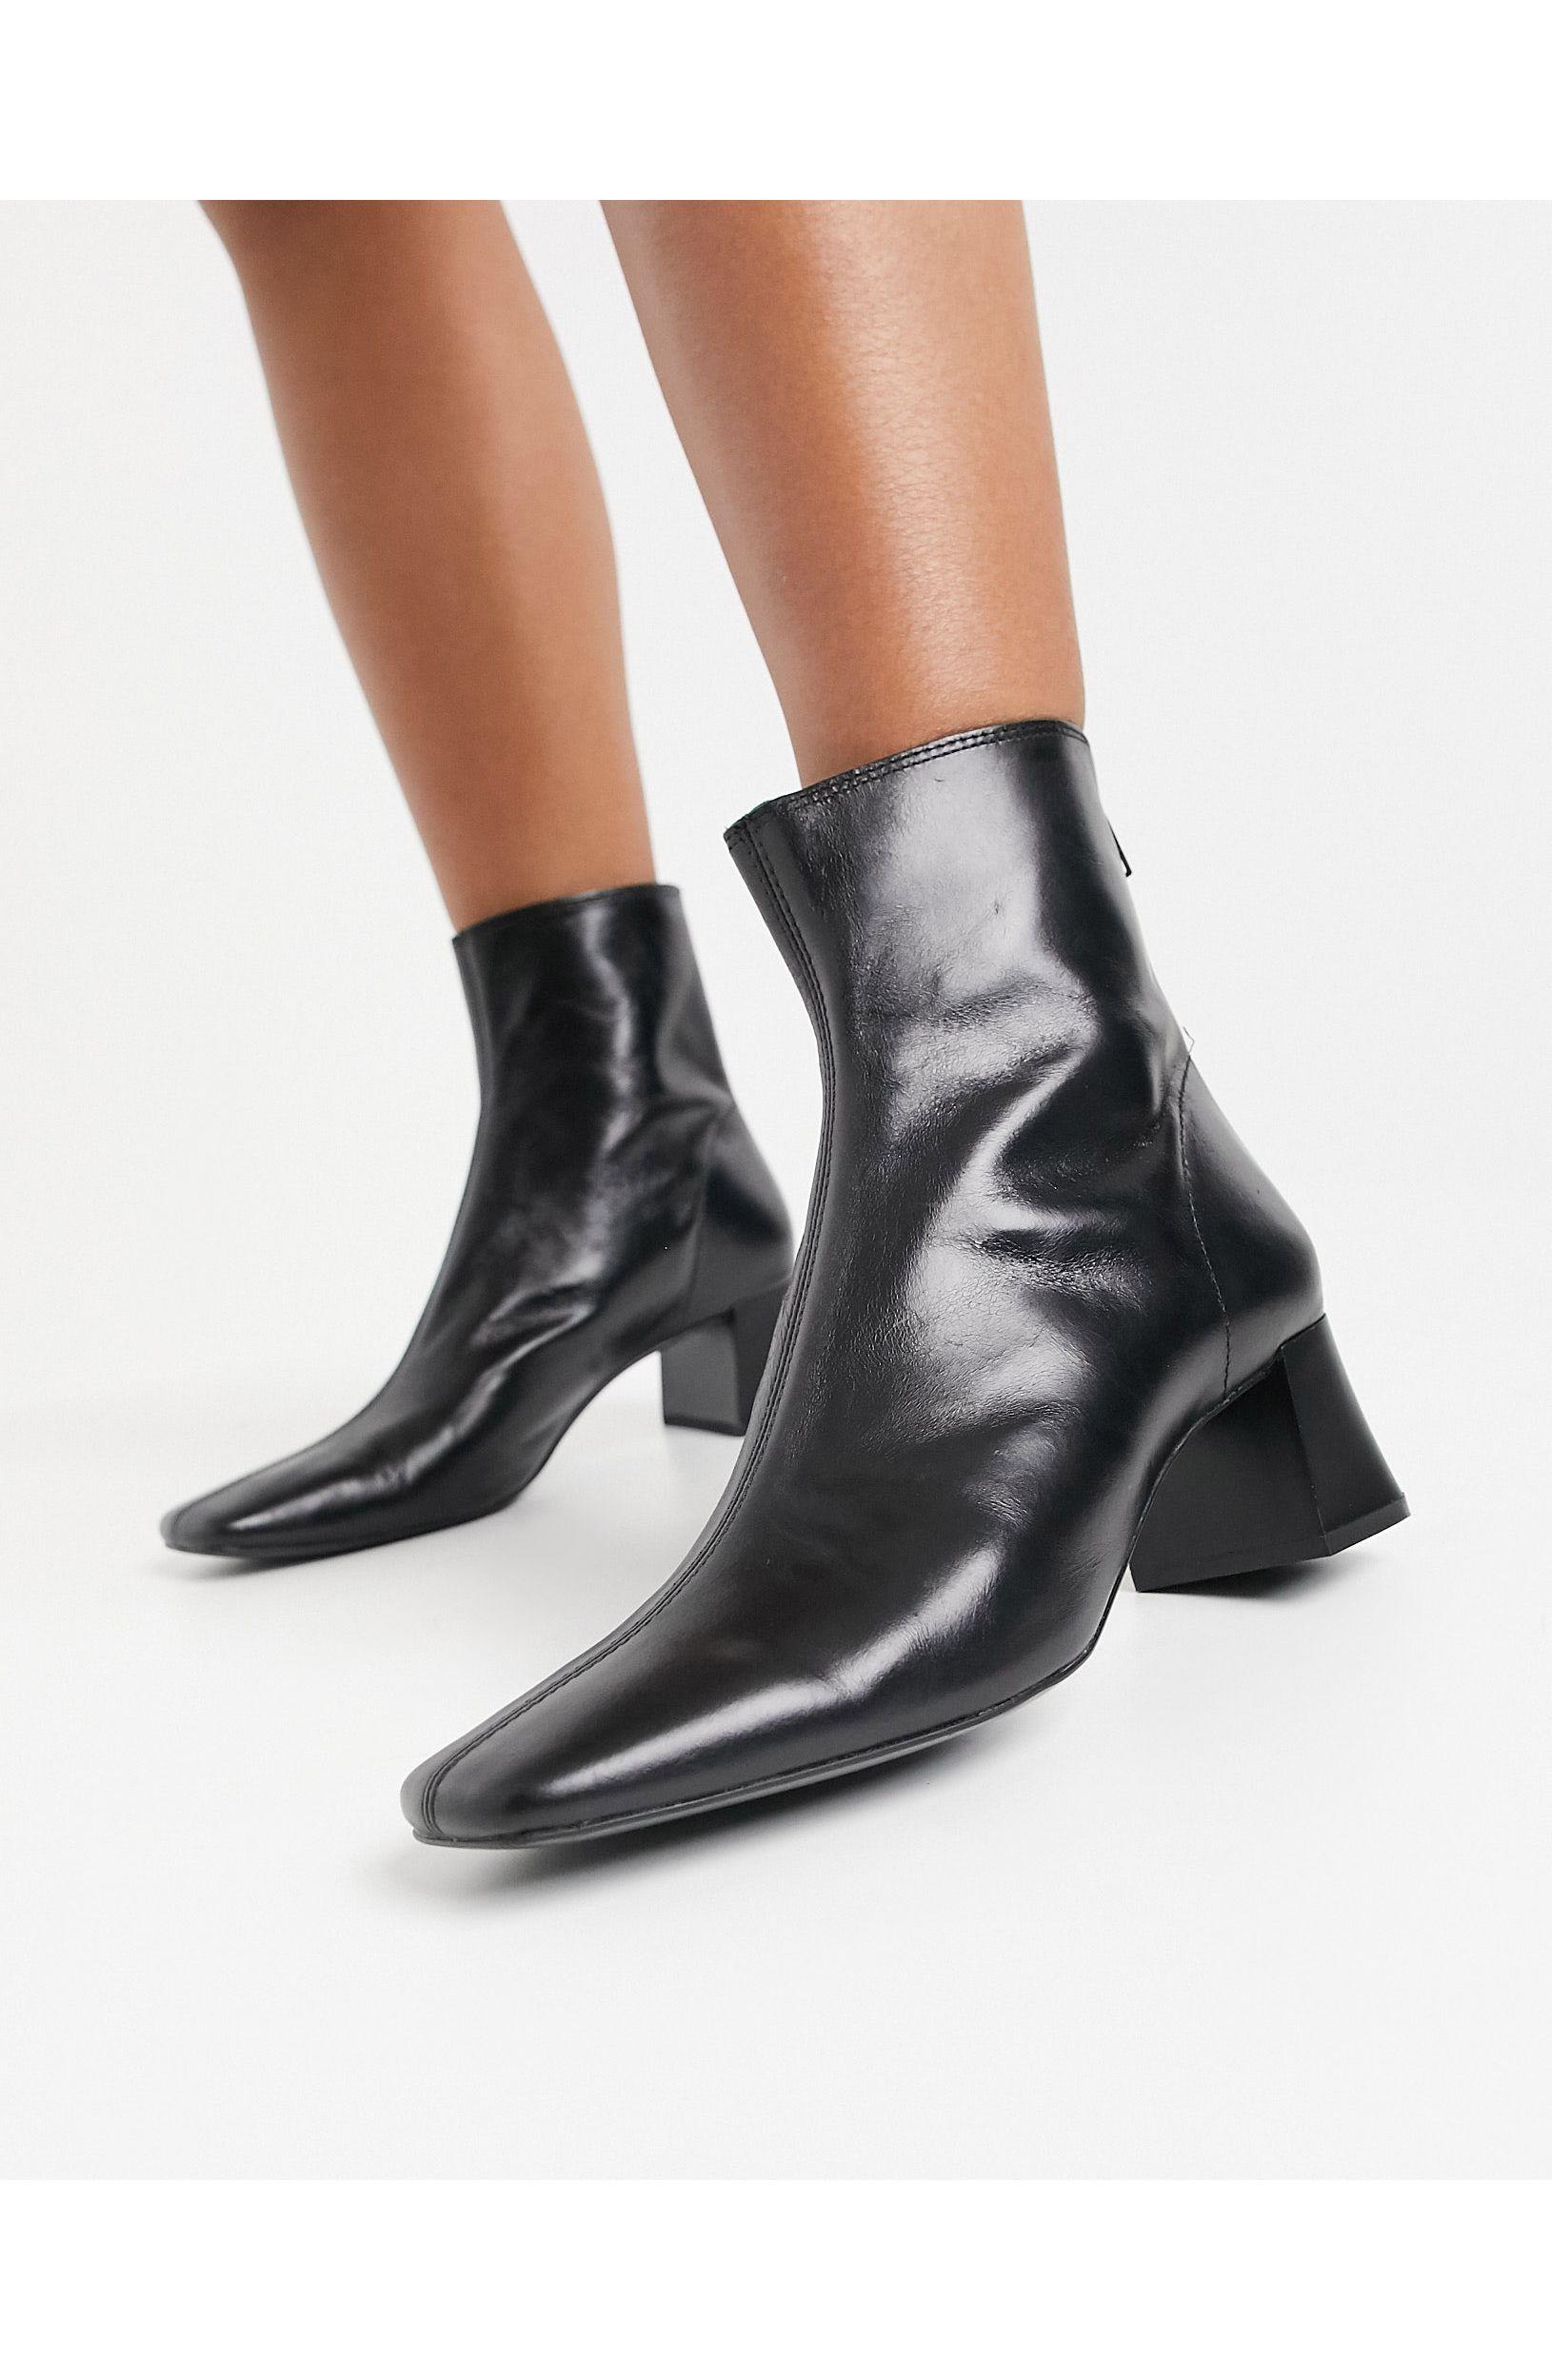 Mango Leather Mid Heel Boots in Black | Lyst